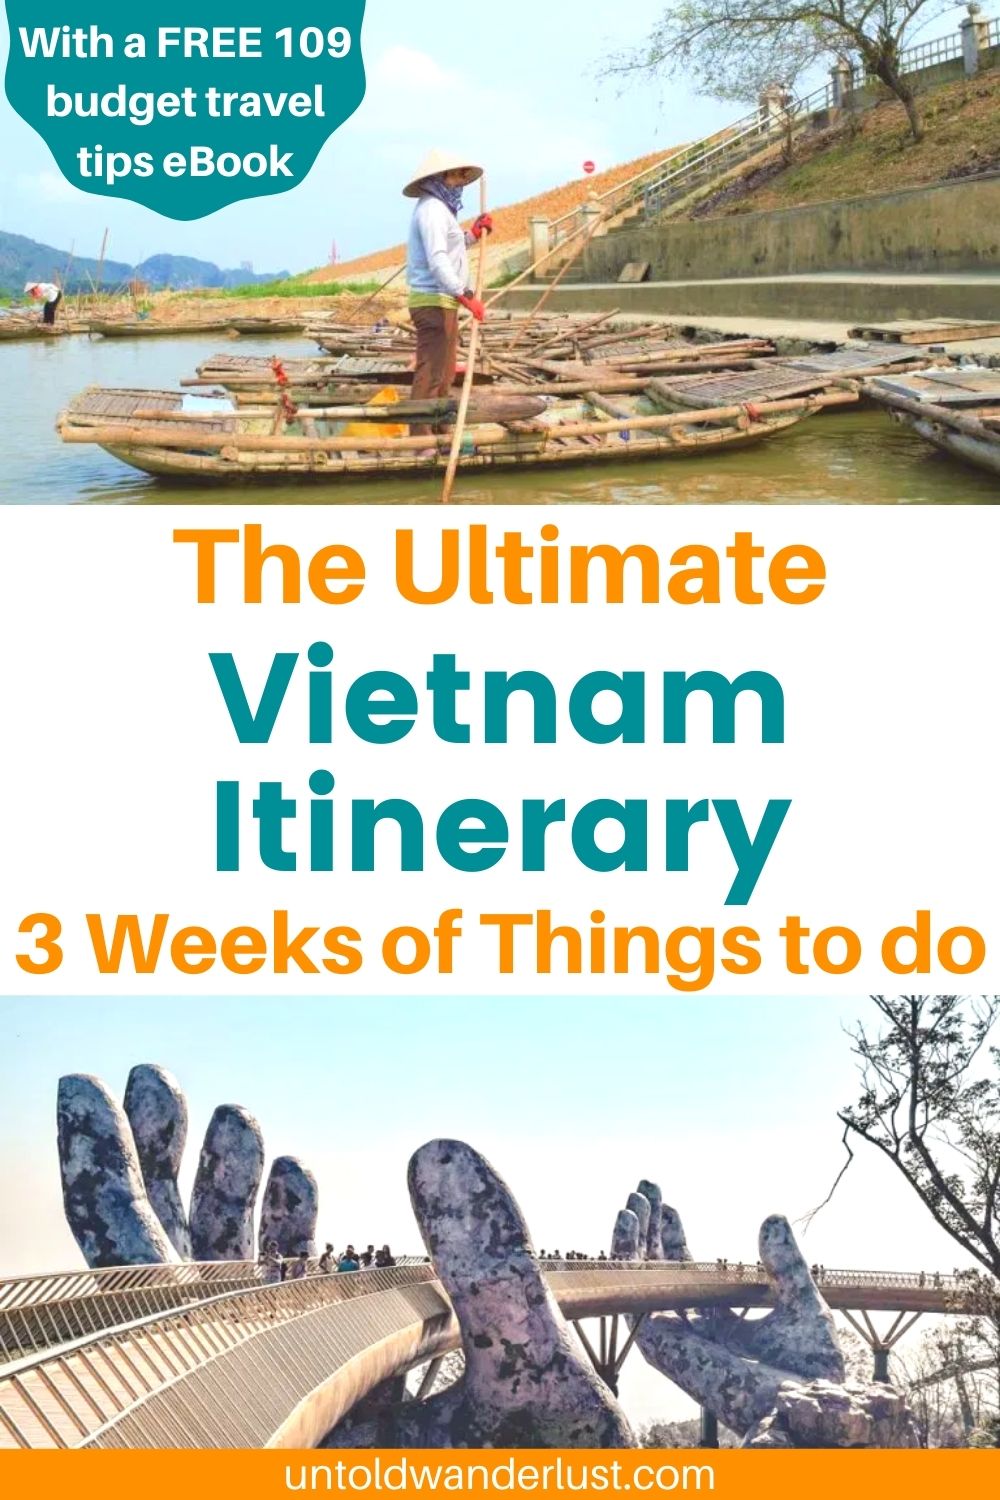 The Ultimate Vietnam Itinerary | 3 Weeks of Things to do